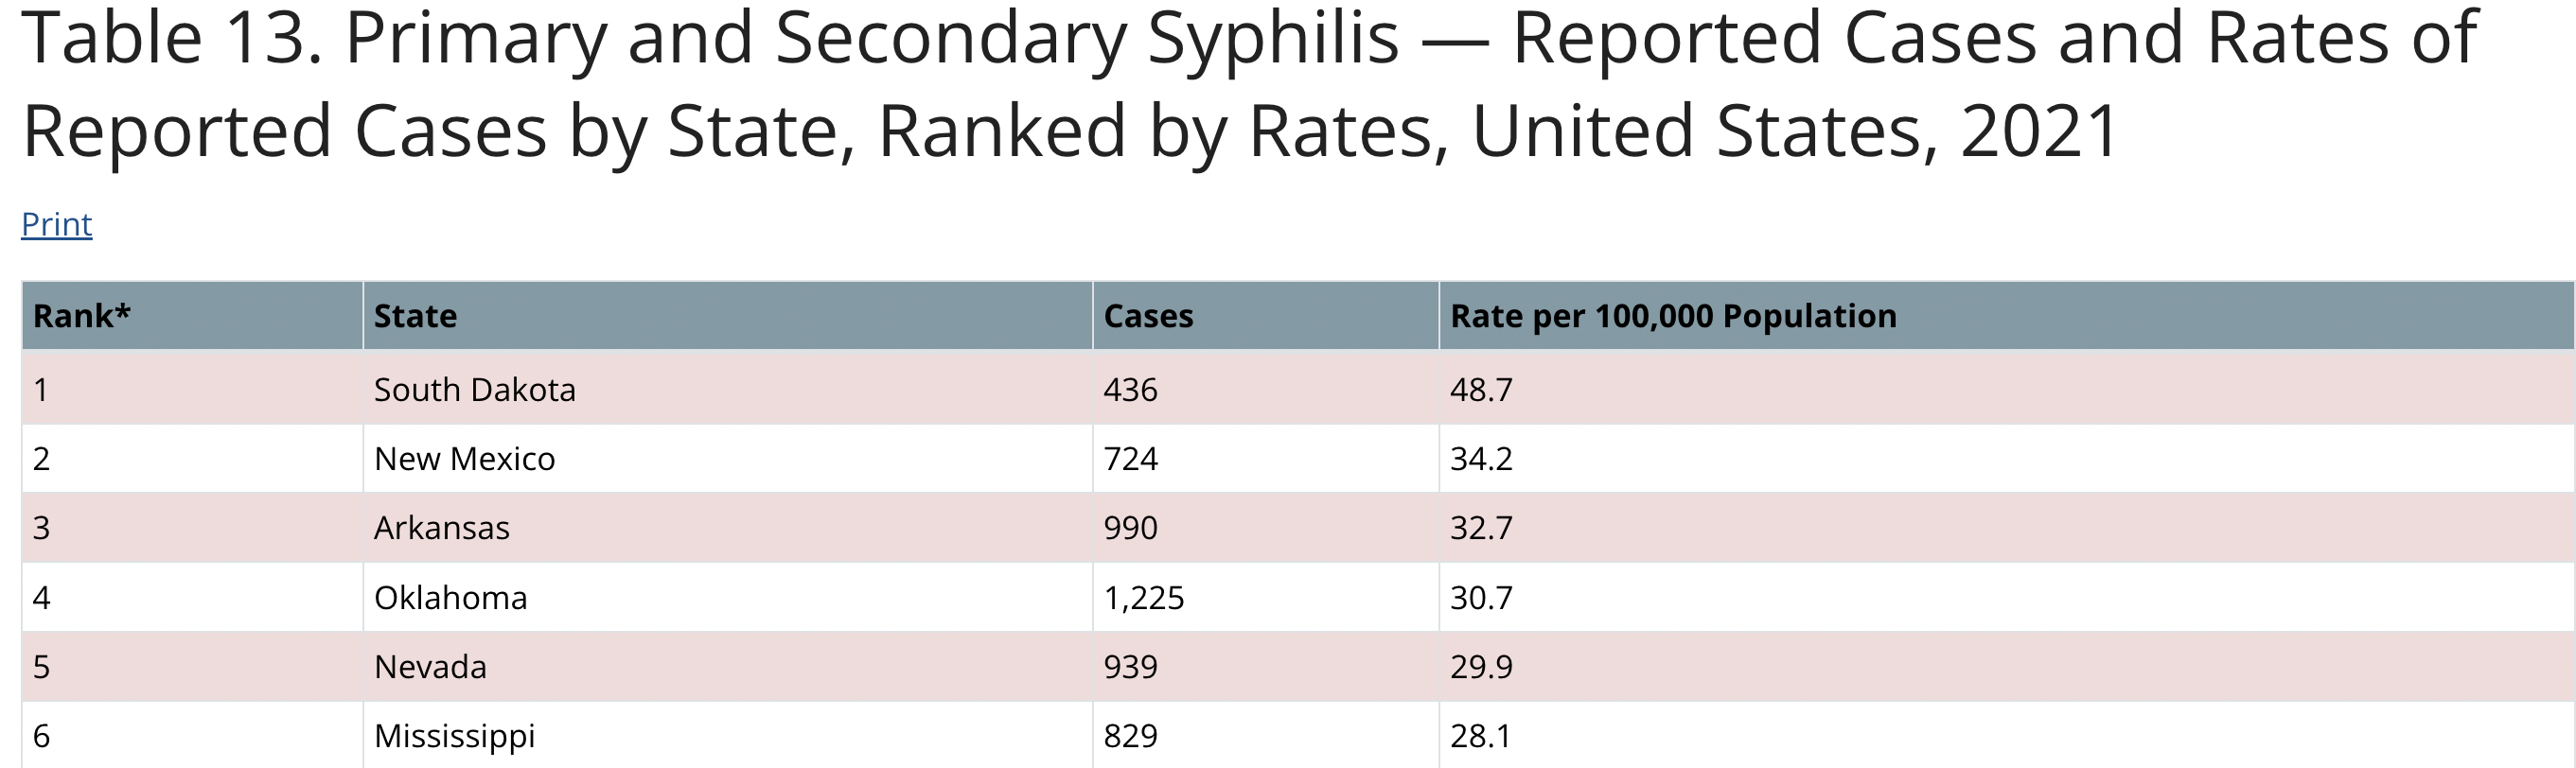 Chart showing reported cases of primary and secondary Syphilis